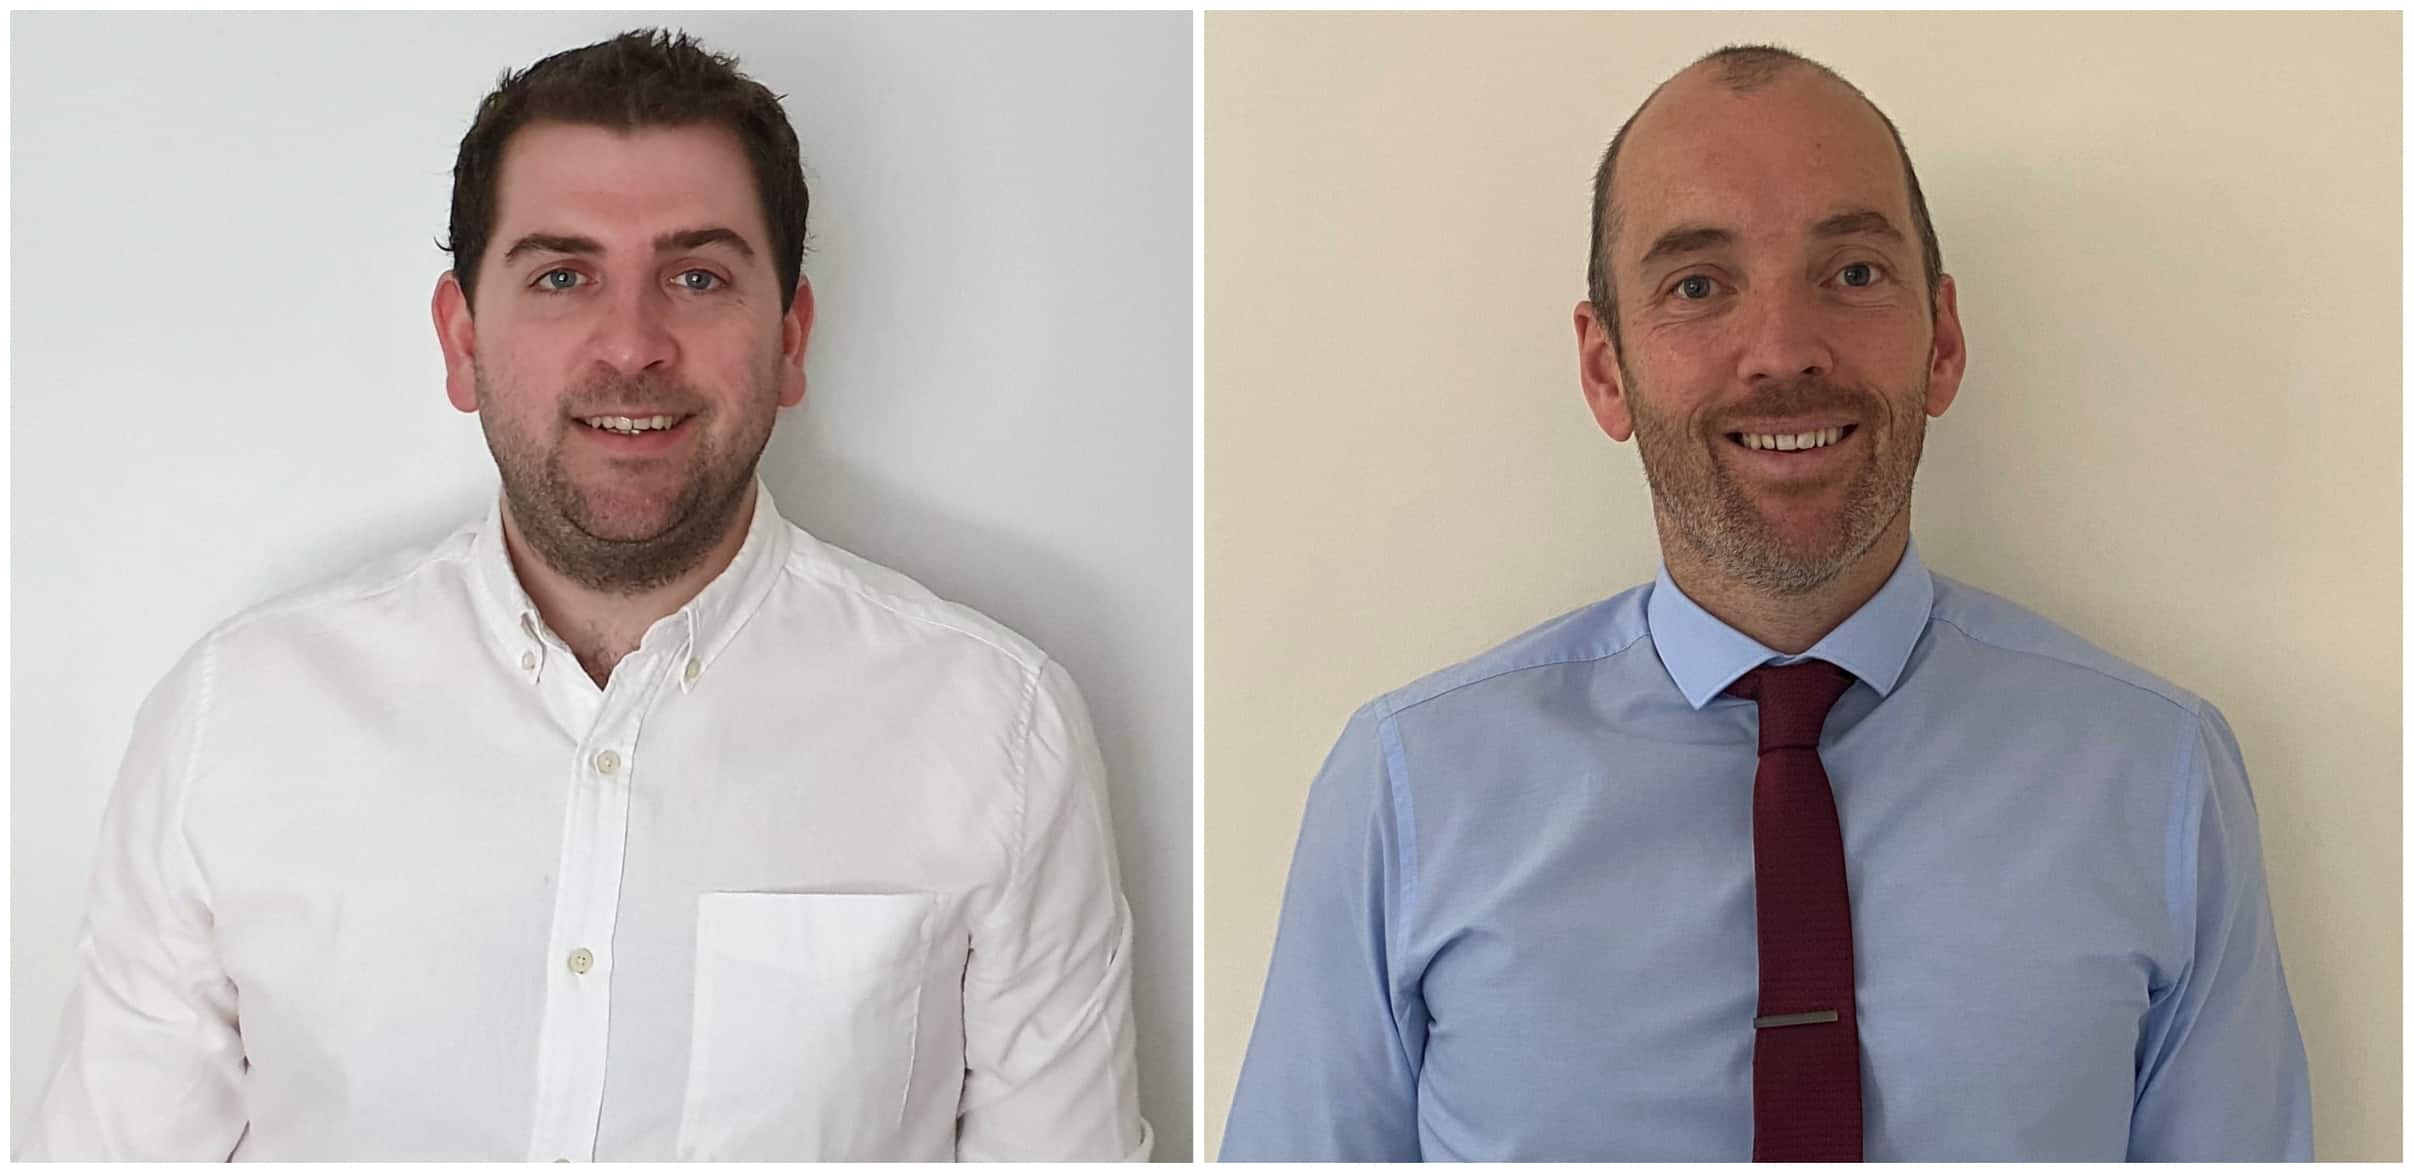 Principality expands broker support team